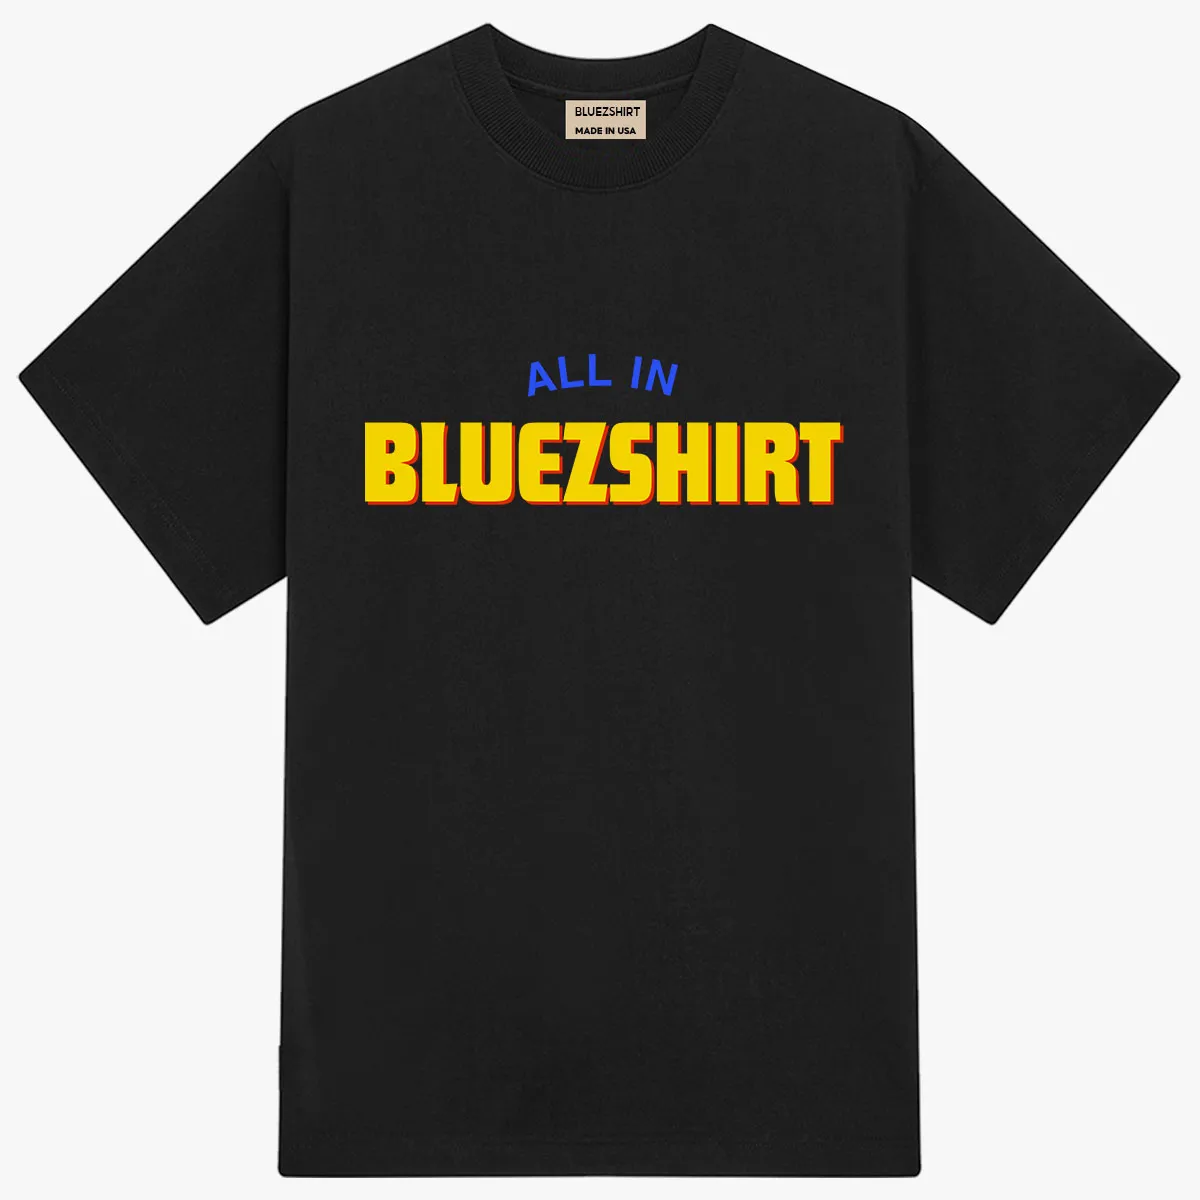 All In Bluezshirt Tee - Black